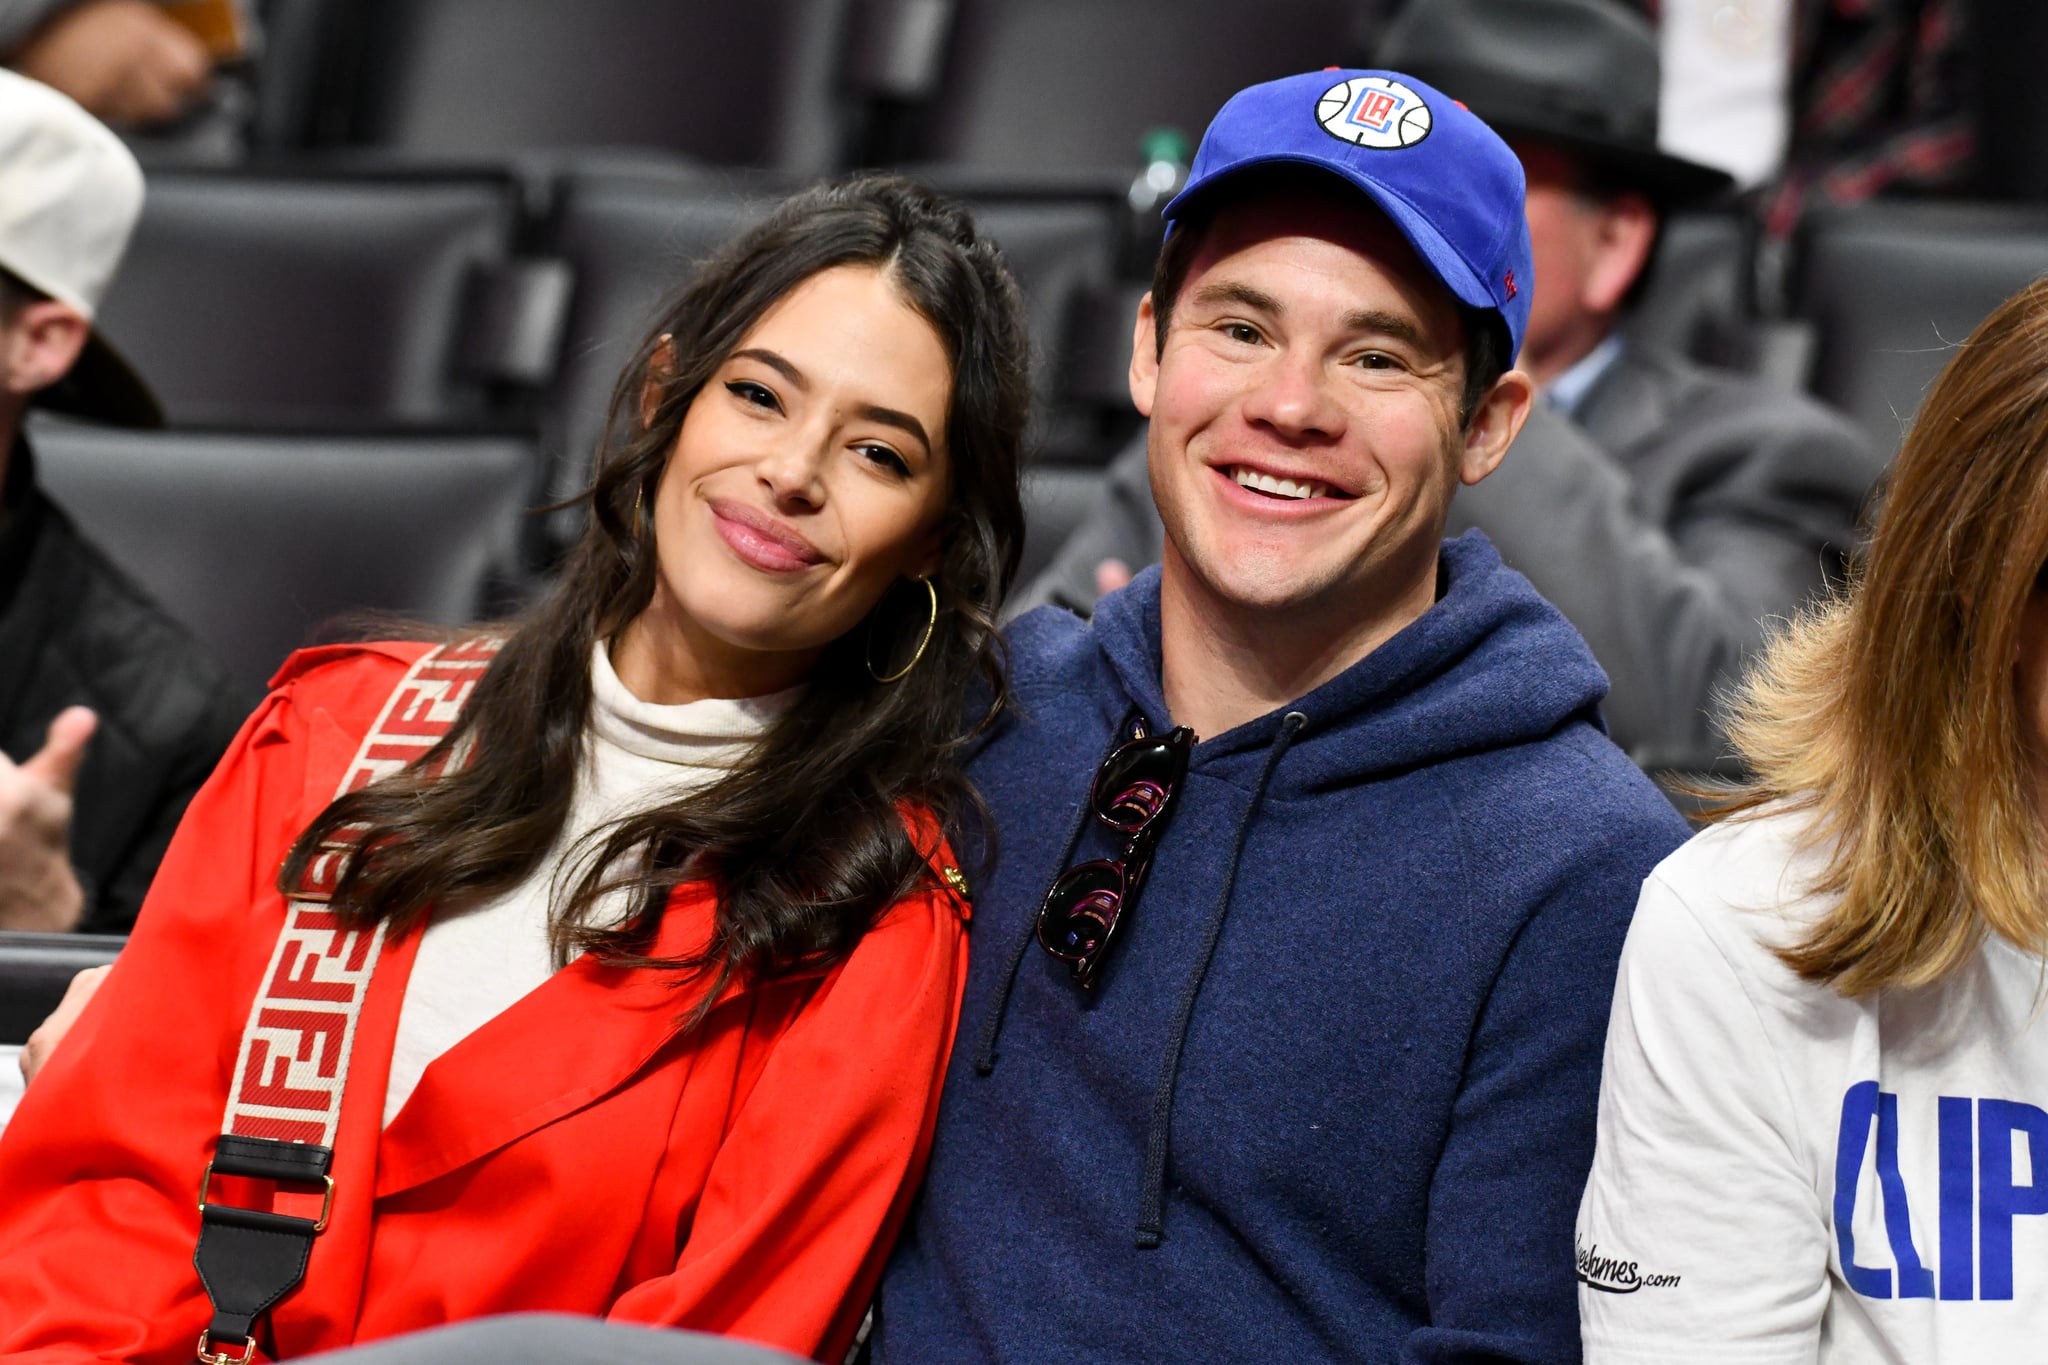 LOS ANGELES, CALIFORNIA - MARCH 08: Chloe Bridges and Adam DeVine attend a basketball game between the Los Angeles Clippers and the Los Angeles Lakers at Staples Center on March 08, 2020 in Los Angeles, California. (Photo by Allen Berezovsky/Getty Images)